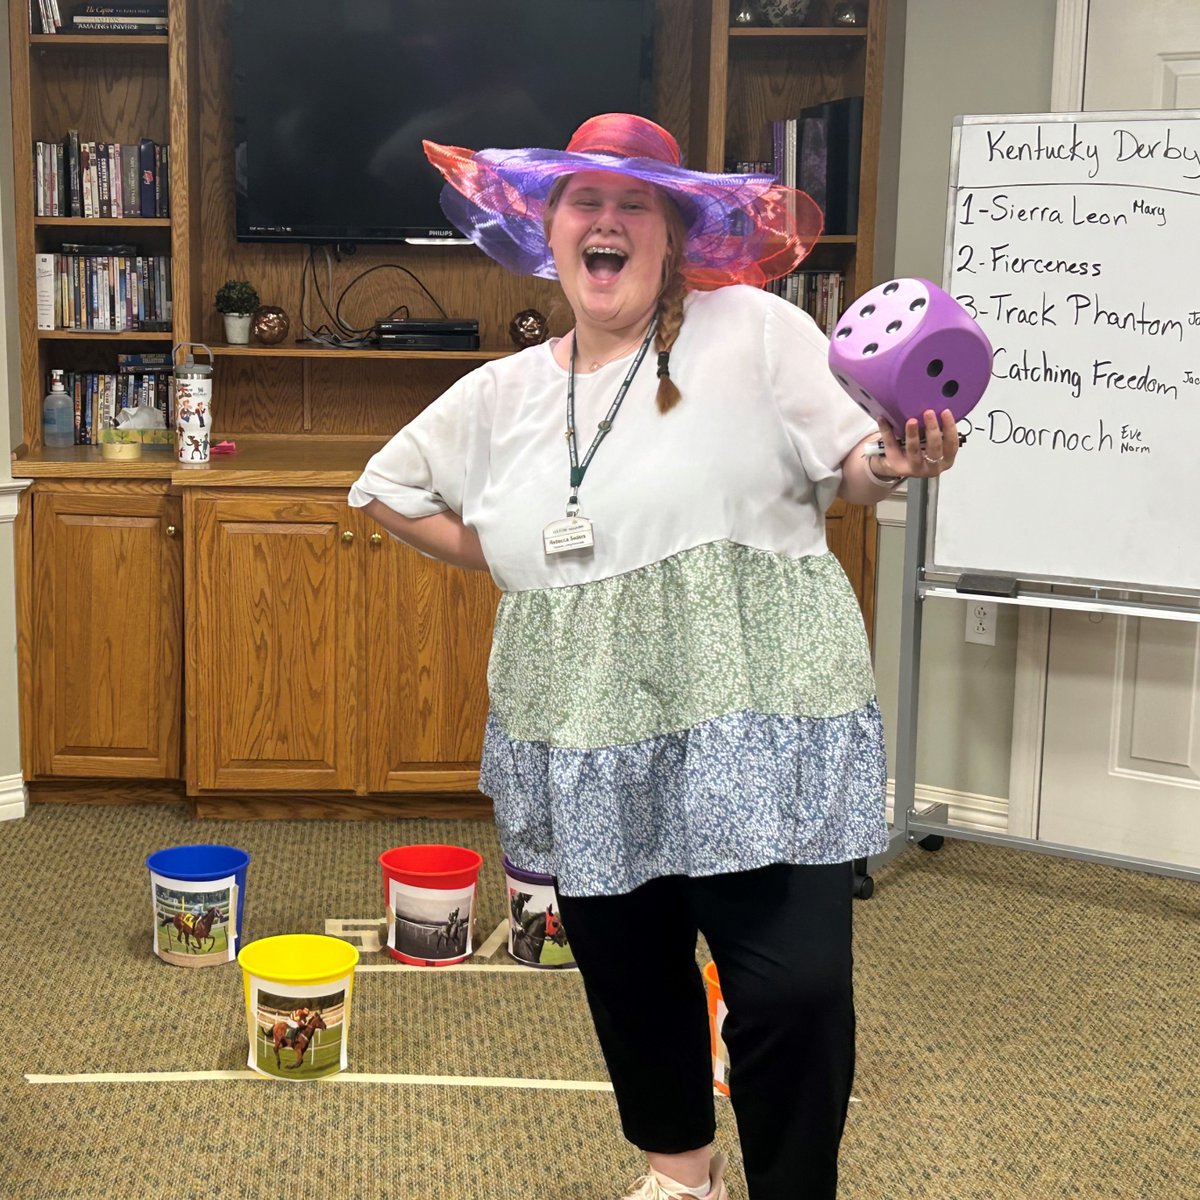 Bring your best self (and Kentucky Derby hat) to work! Just like our co-workers.

#LoveYourJob #BestSelf #YouMatter #BeAppreciated